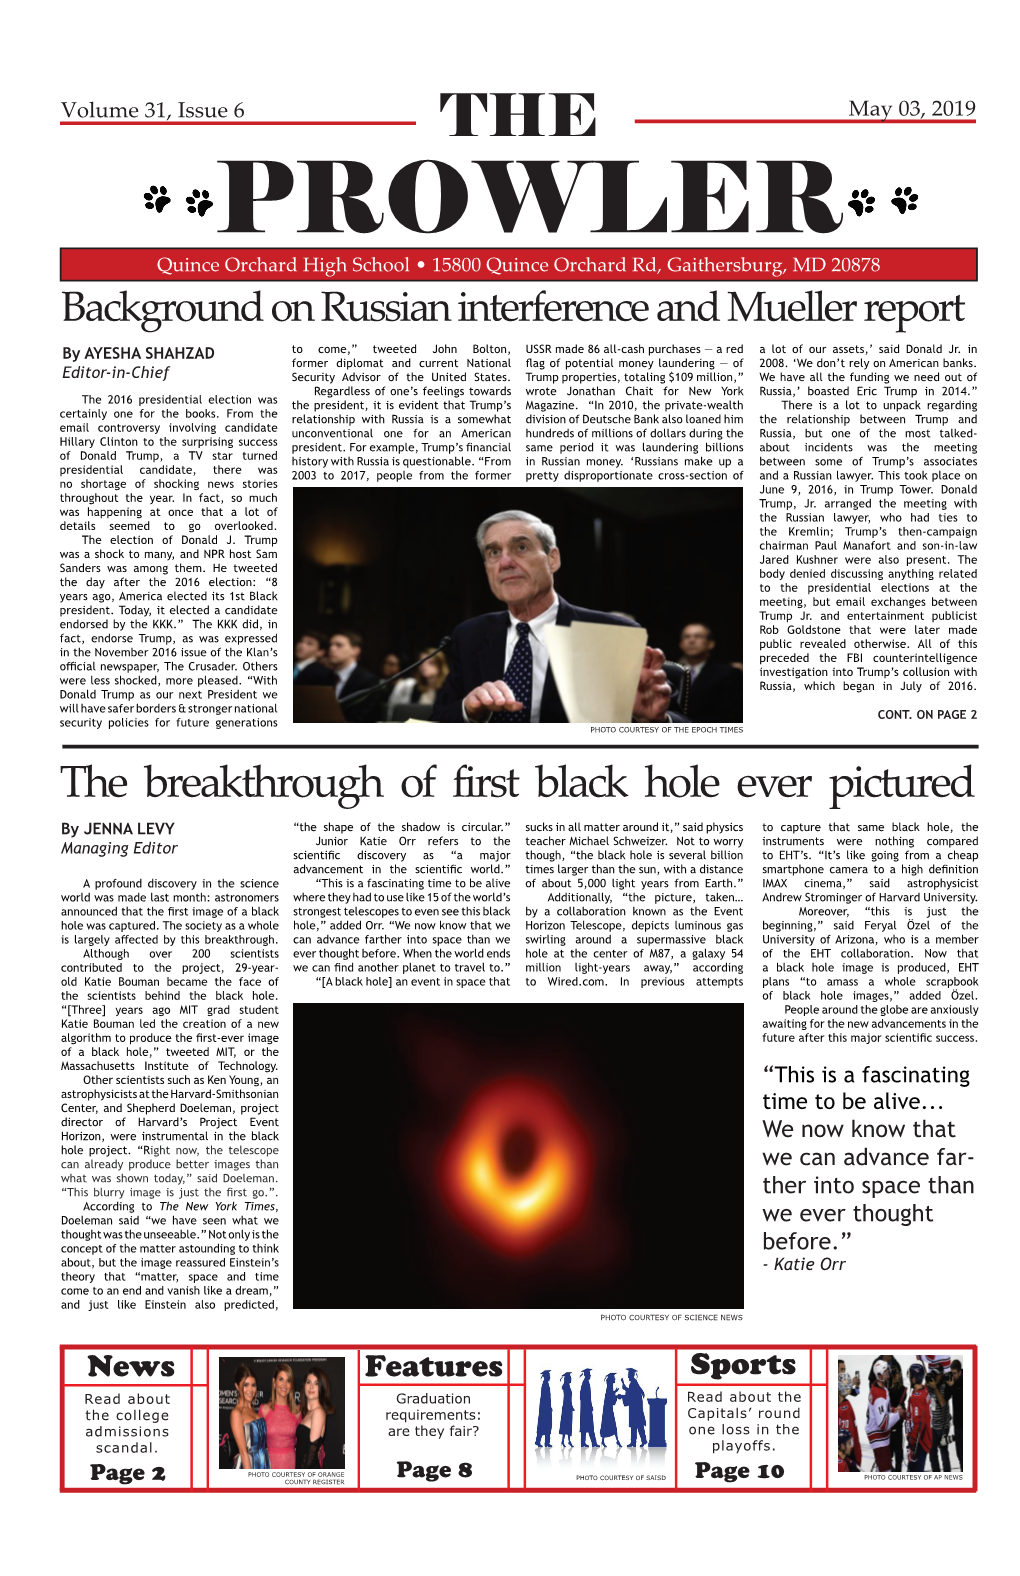 The Breakthrough of First Black Hole Ever Pictured